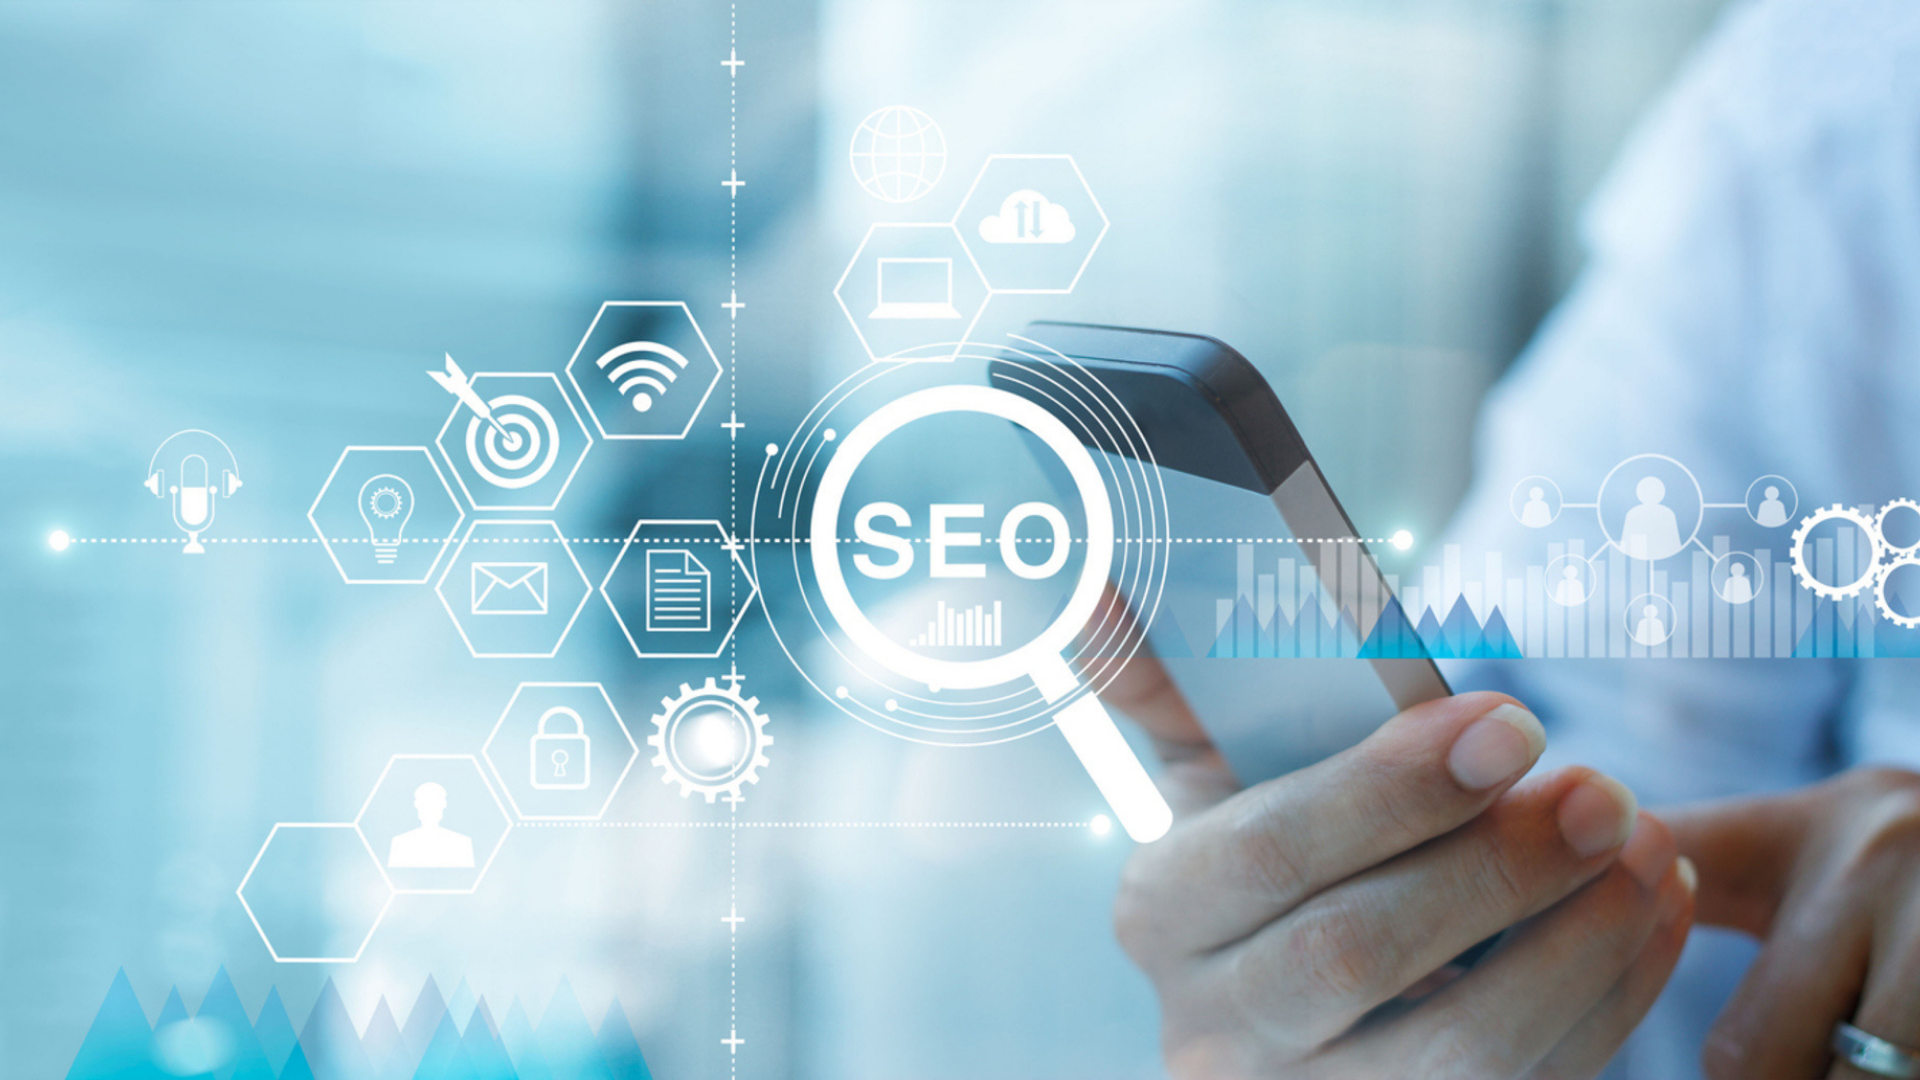 What Is SEO? Why Do We Need SEO?